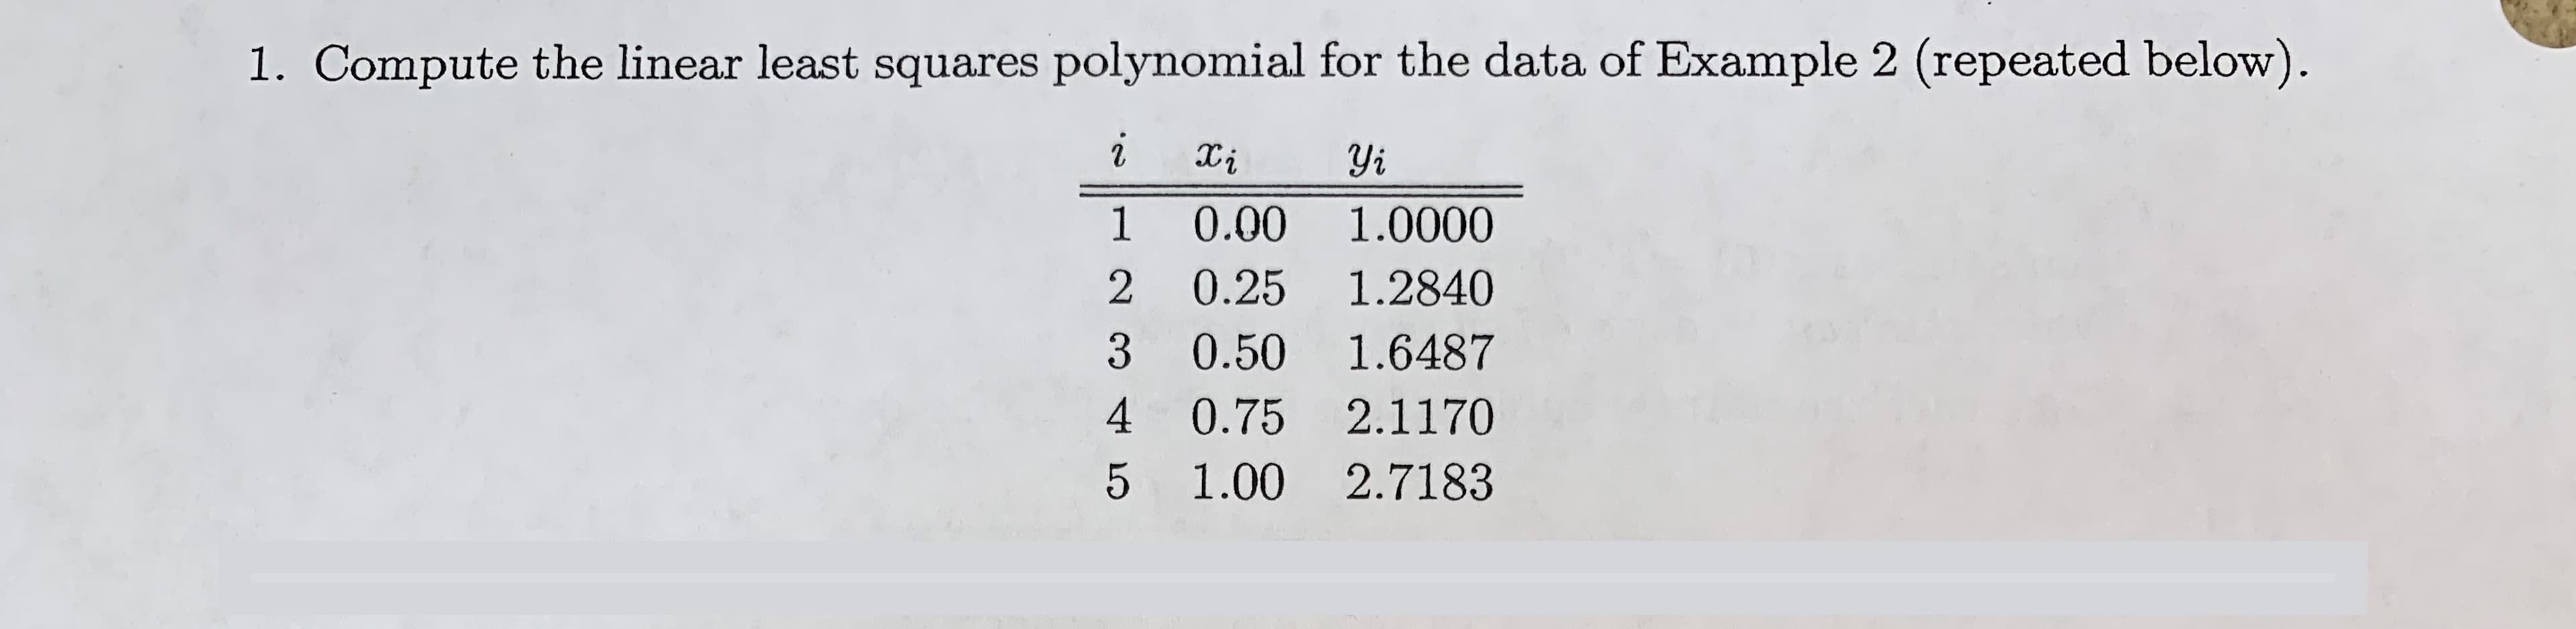 1. Compute the linear least squares polynomial for the data of Example 2 (repeated below).
Yi
2
1
0.00
1.0000
2
0.25 1.2840
3 0.50 1.6487
4 0.75 2.1170
5 1.00 2.7183
